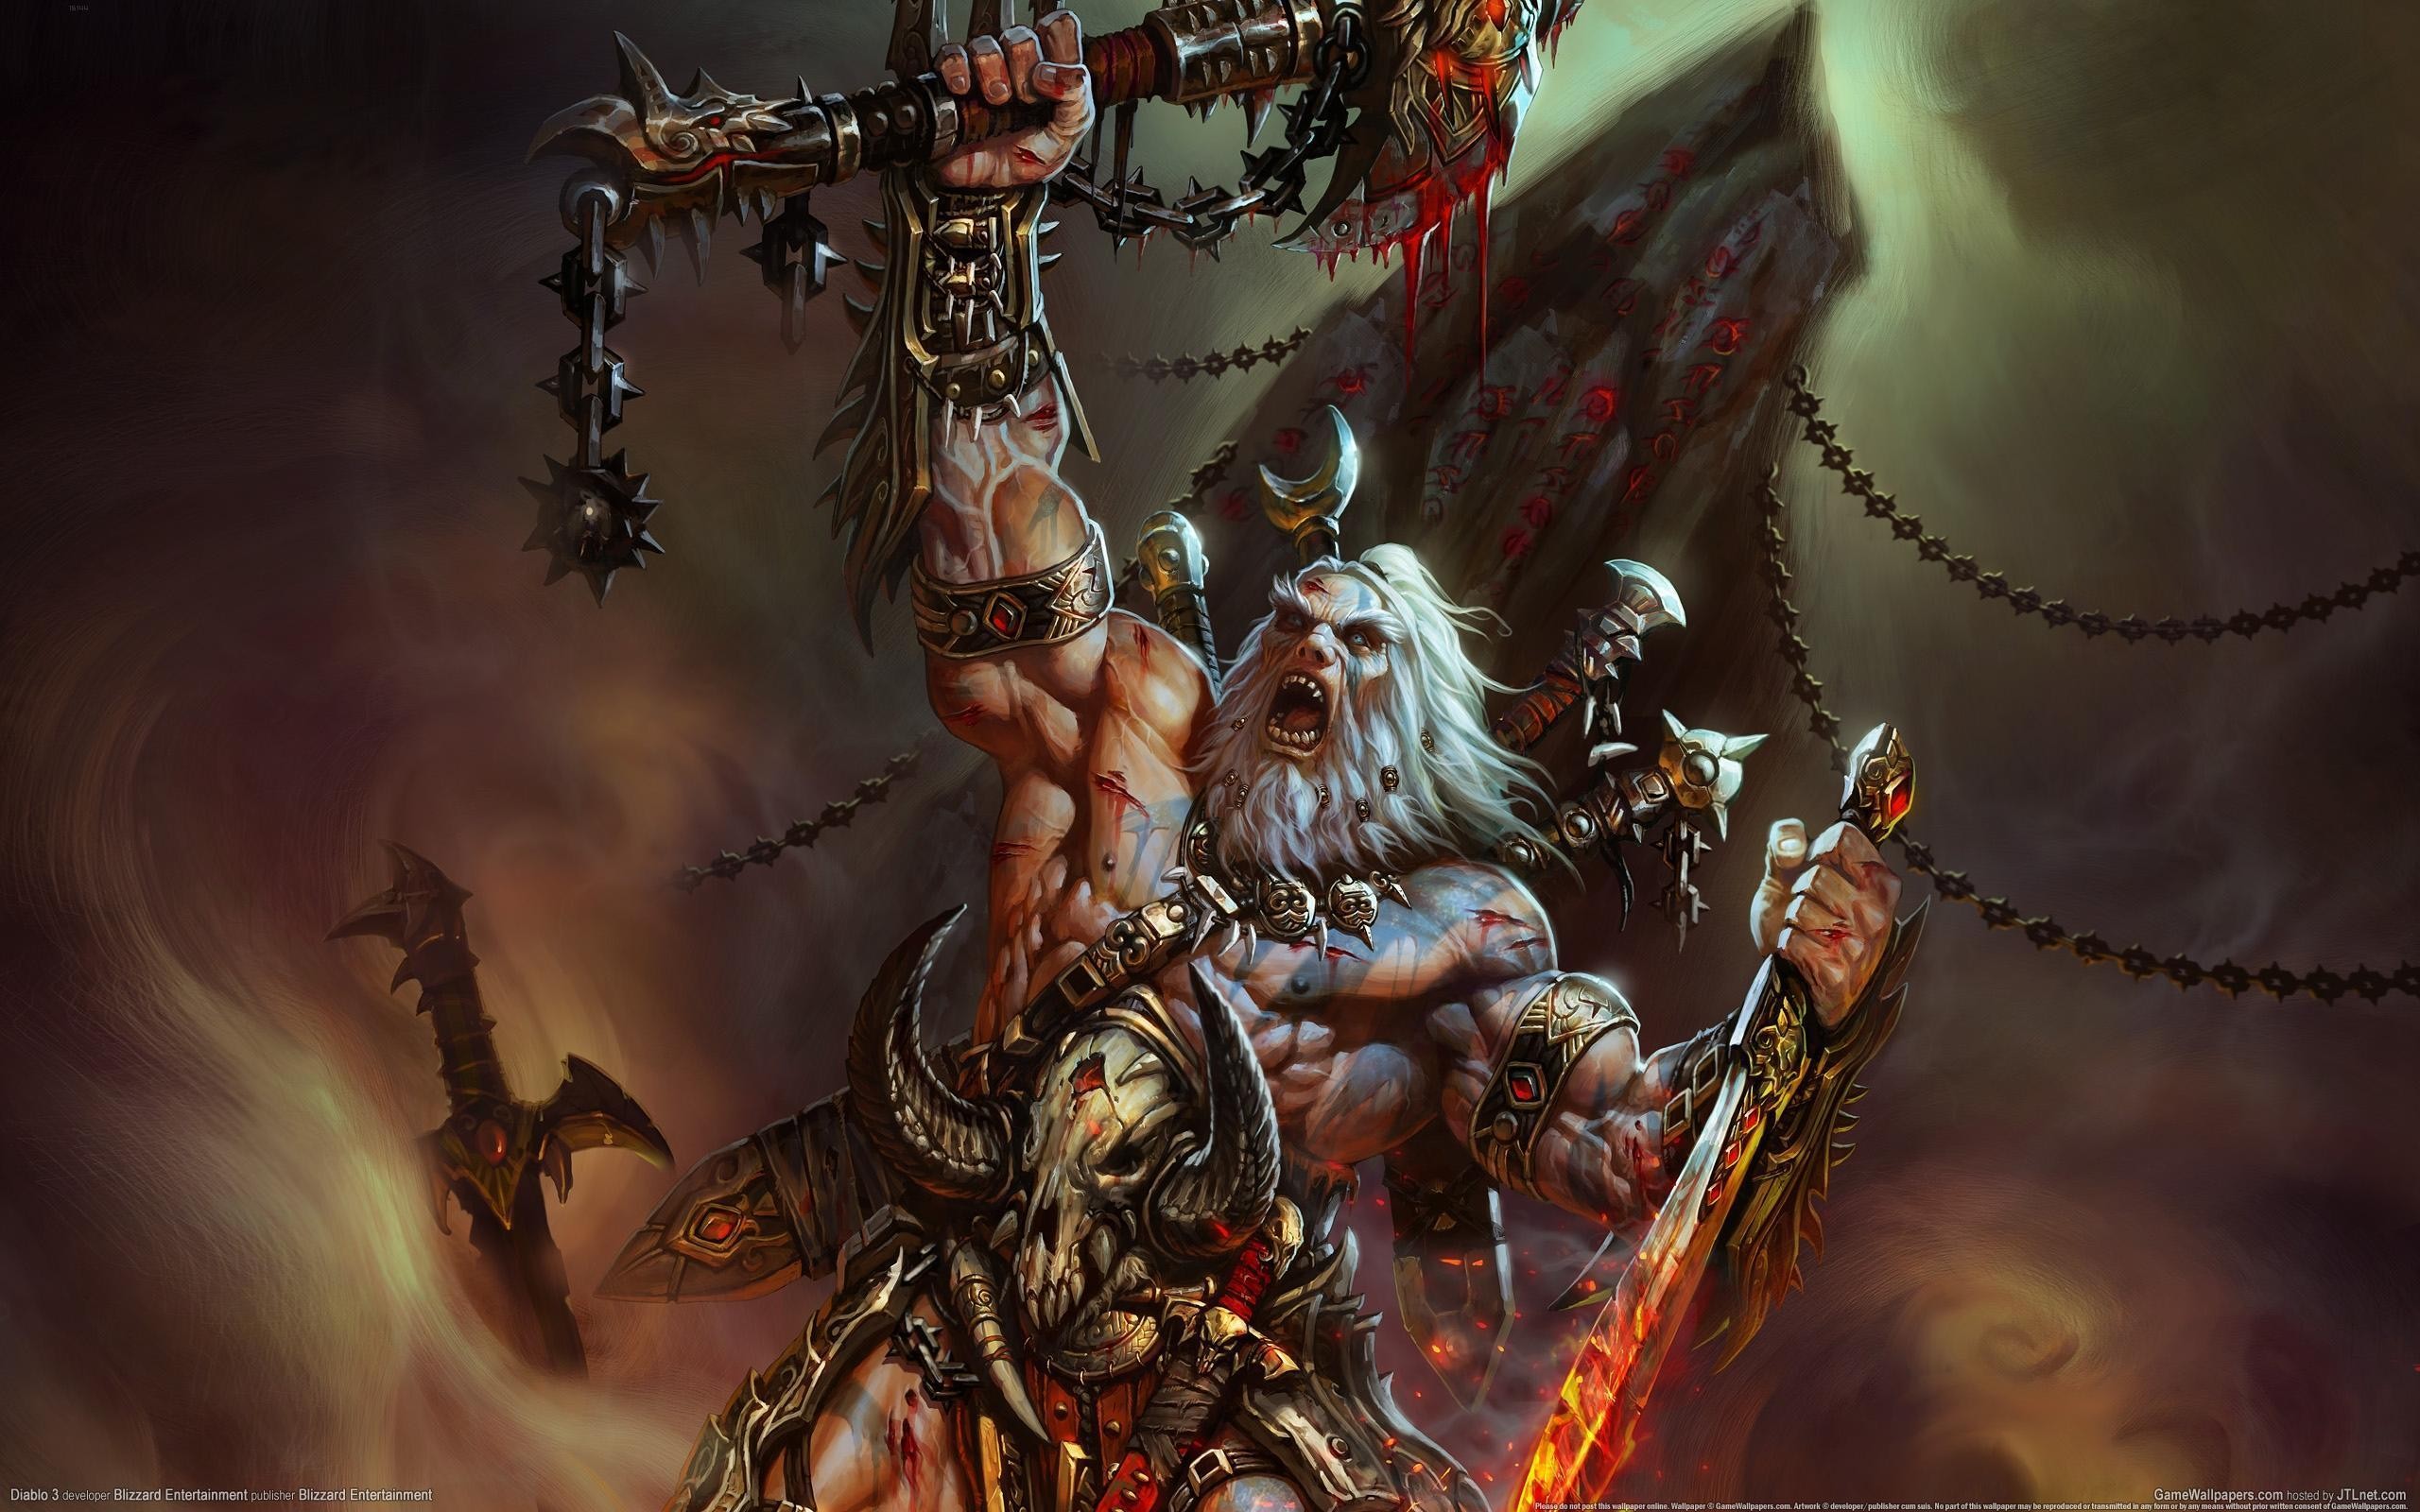 General 2560x1600 Diablo III video games fantasy art digital art barbarian muscles weapon blood open mouth PC gaming video game art Blizzard Entertainment